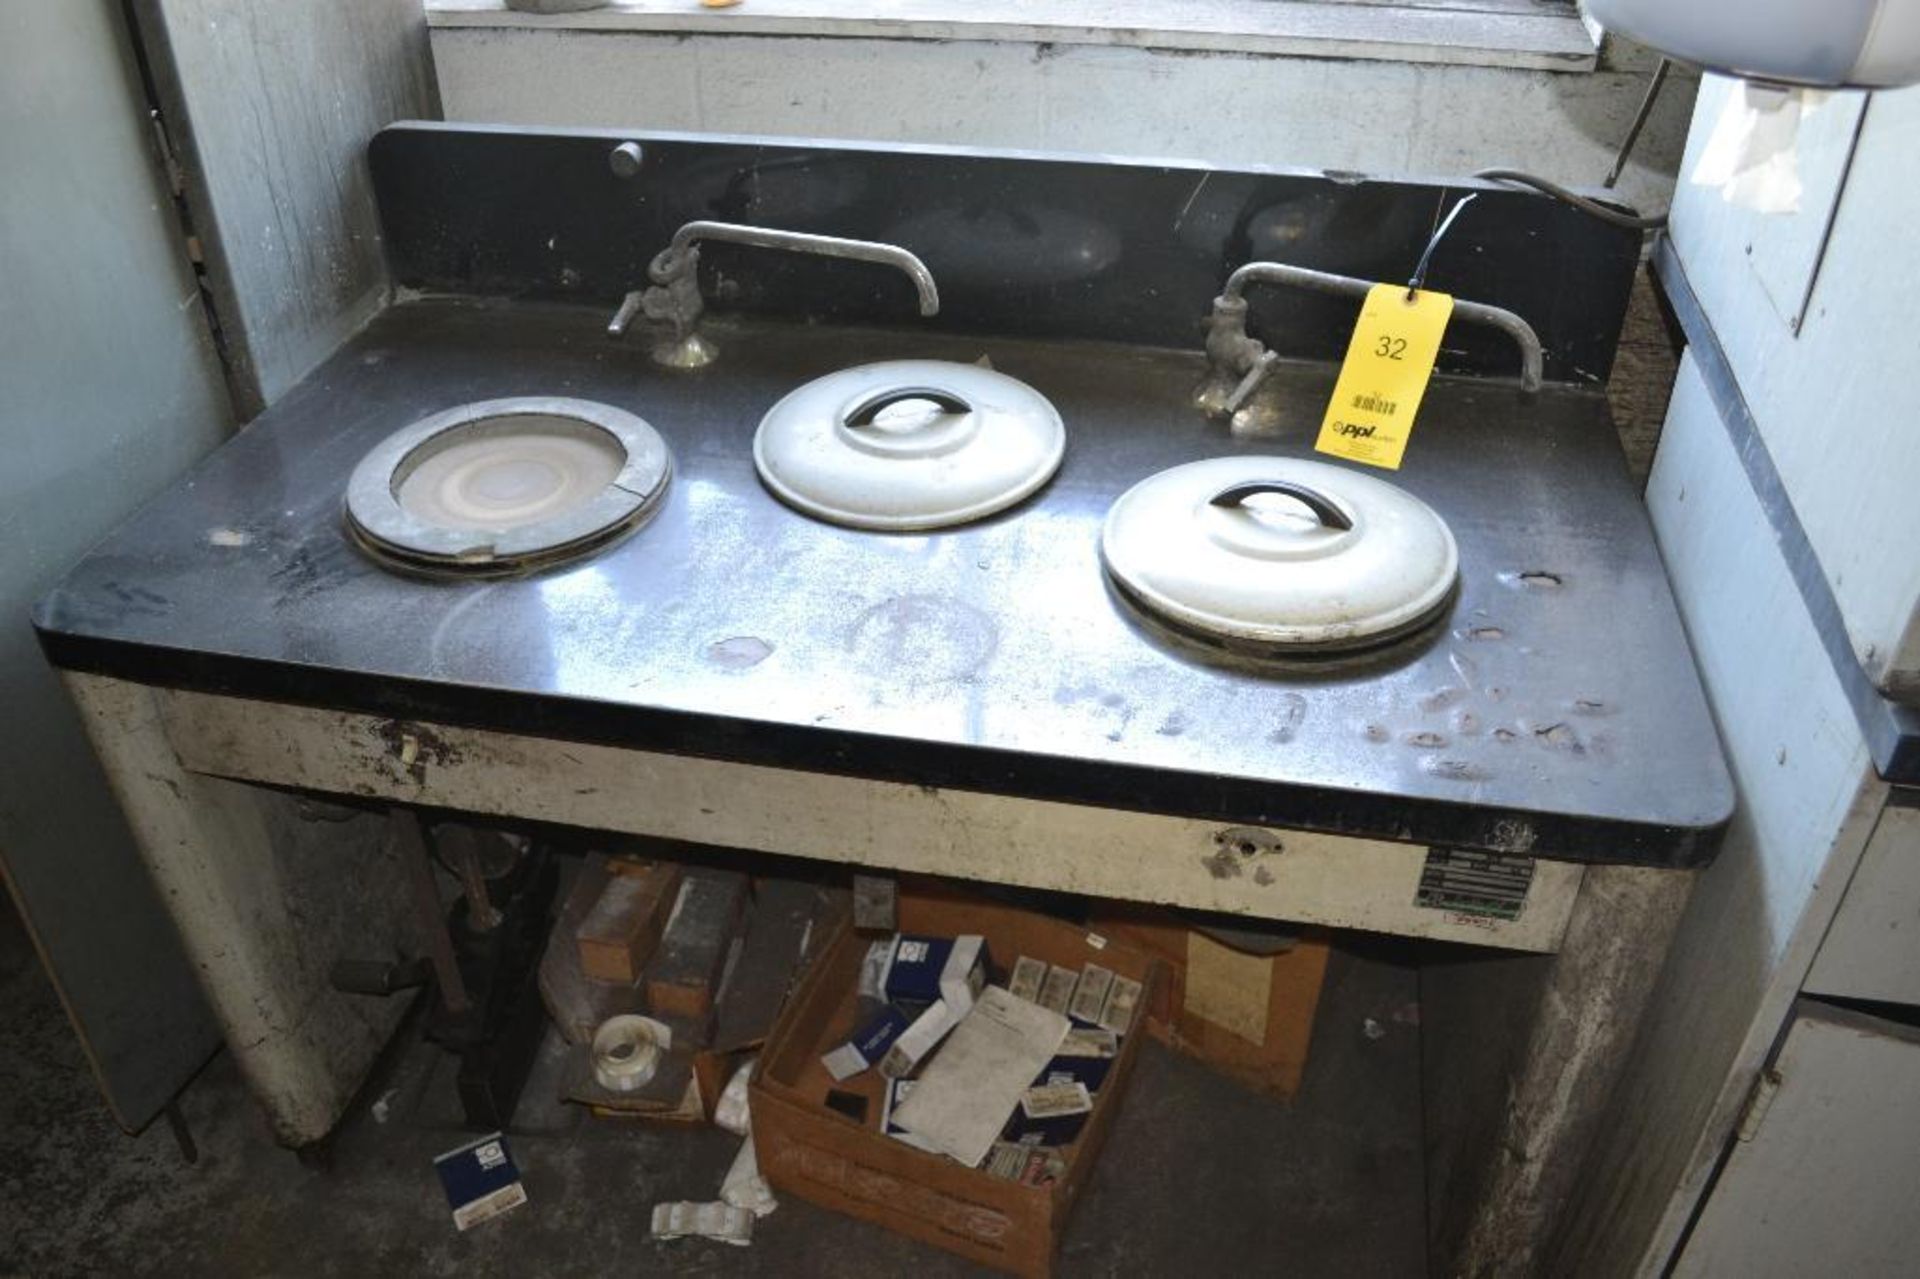 LOT: Contents of Lab including Buehler Polisher, Sander, Polishing Table, Cabinets with Supplies, Gr - Image 3 of 7